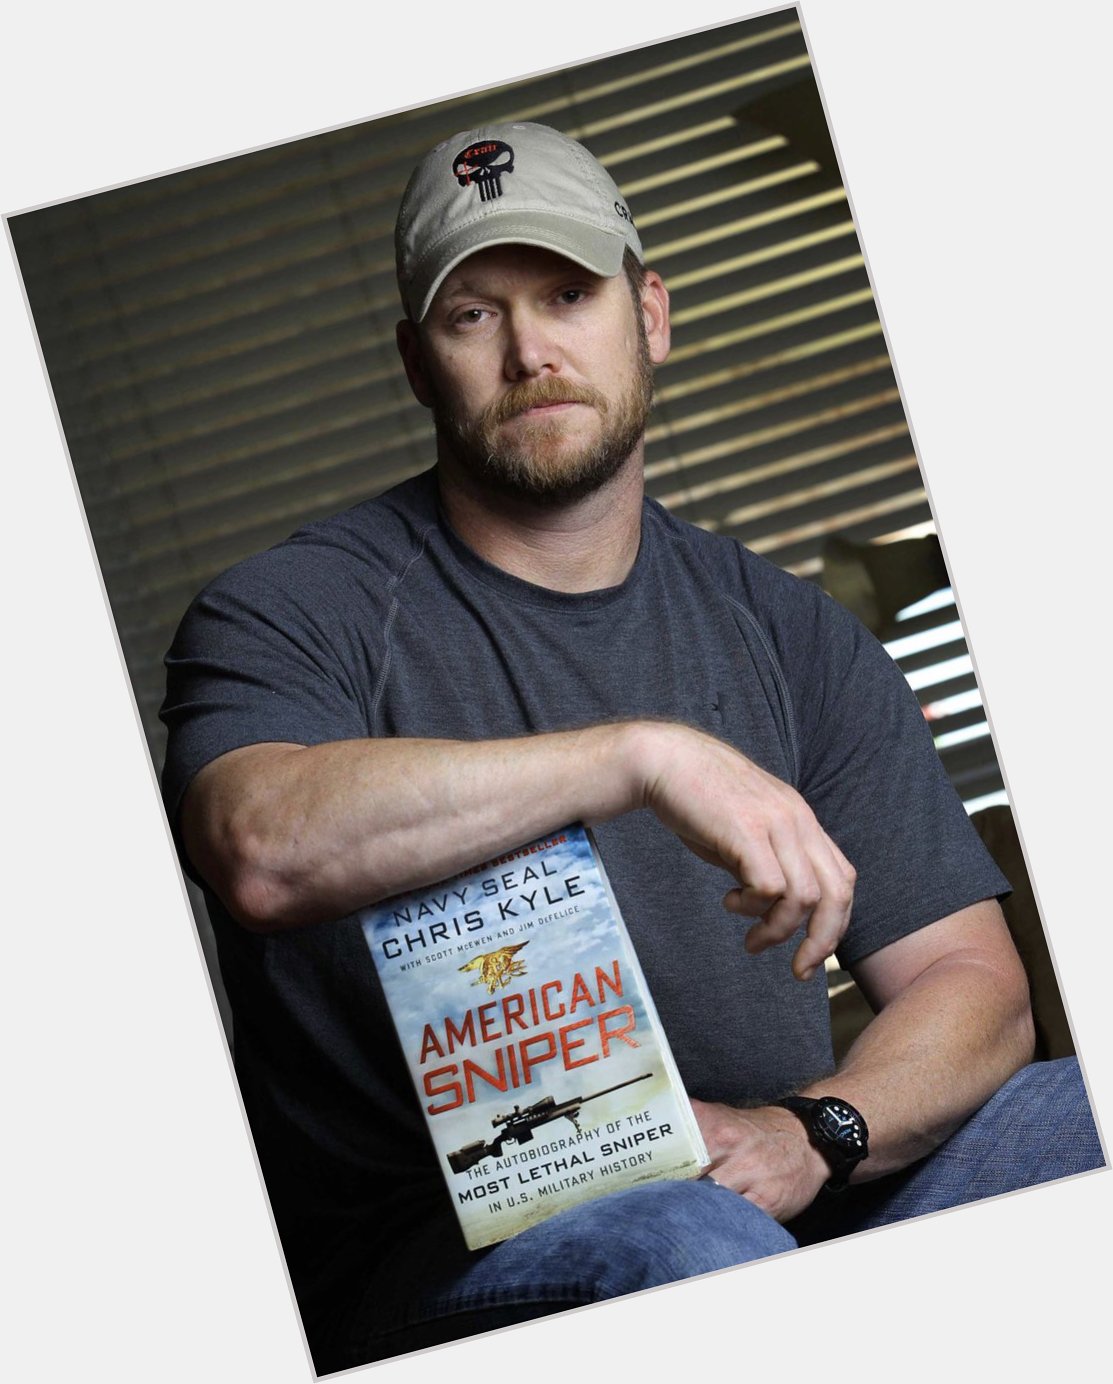 Happy birthday Legend  Thank you for your service, you are greatly appreciated and greatly missed. RIP Chris Kyle 